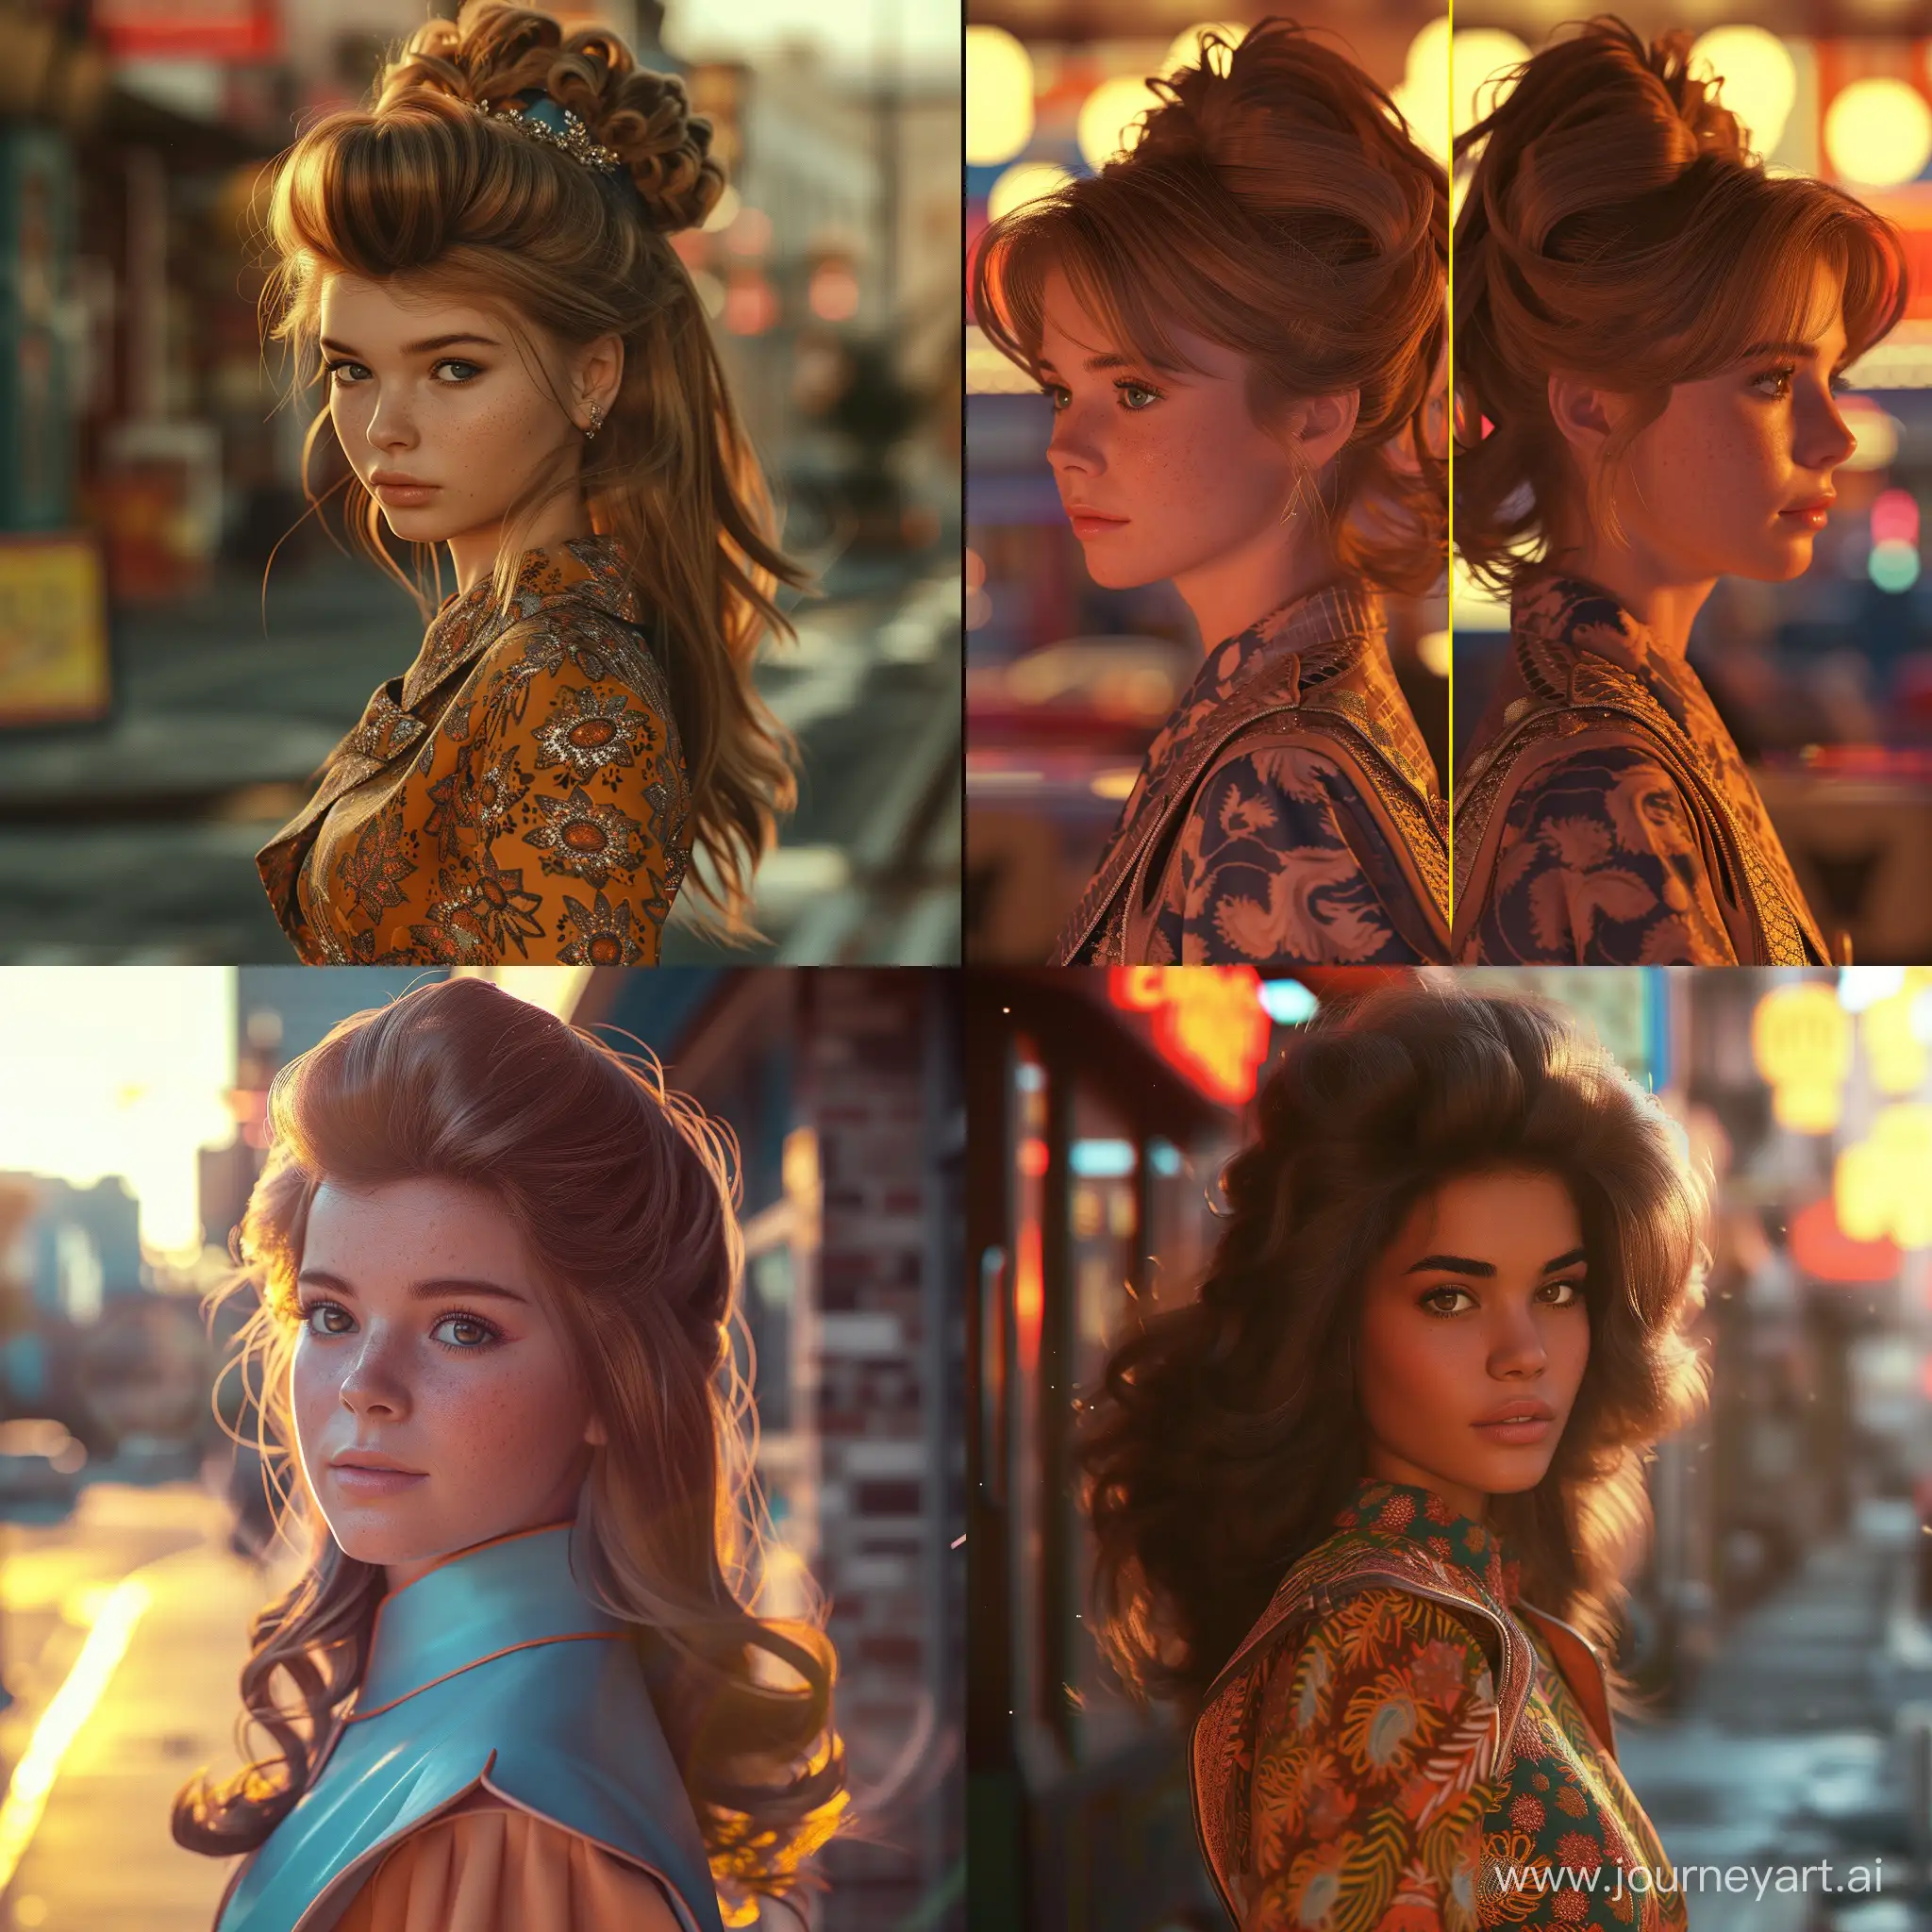  Generate a realistic image of a girl from the 1970s with a modern hairstyle. The setting is a vibrant, urban environment with a mix of retro and contemporary elements. The girl is wearing a stylish outfit that combines 1970s fashion with a modern twist. The lighting is warm, reminiscent of the golden hour.